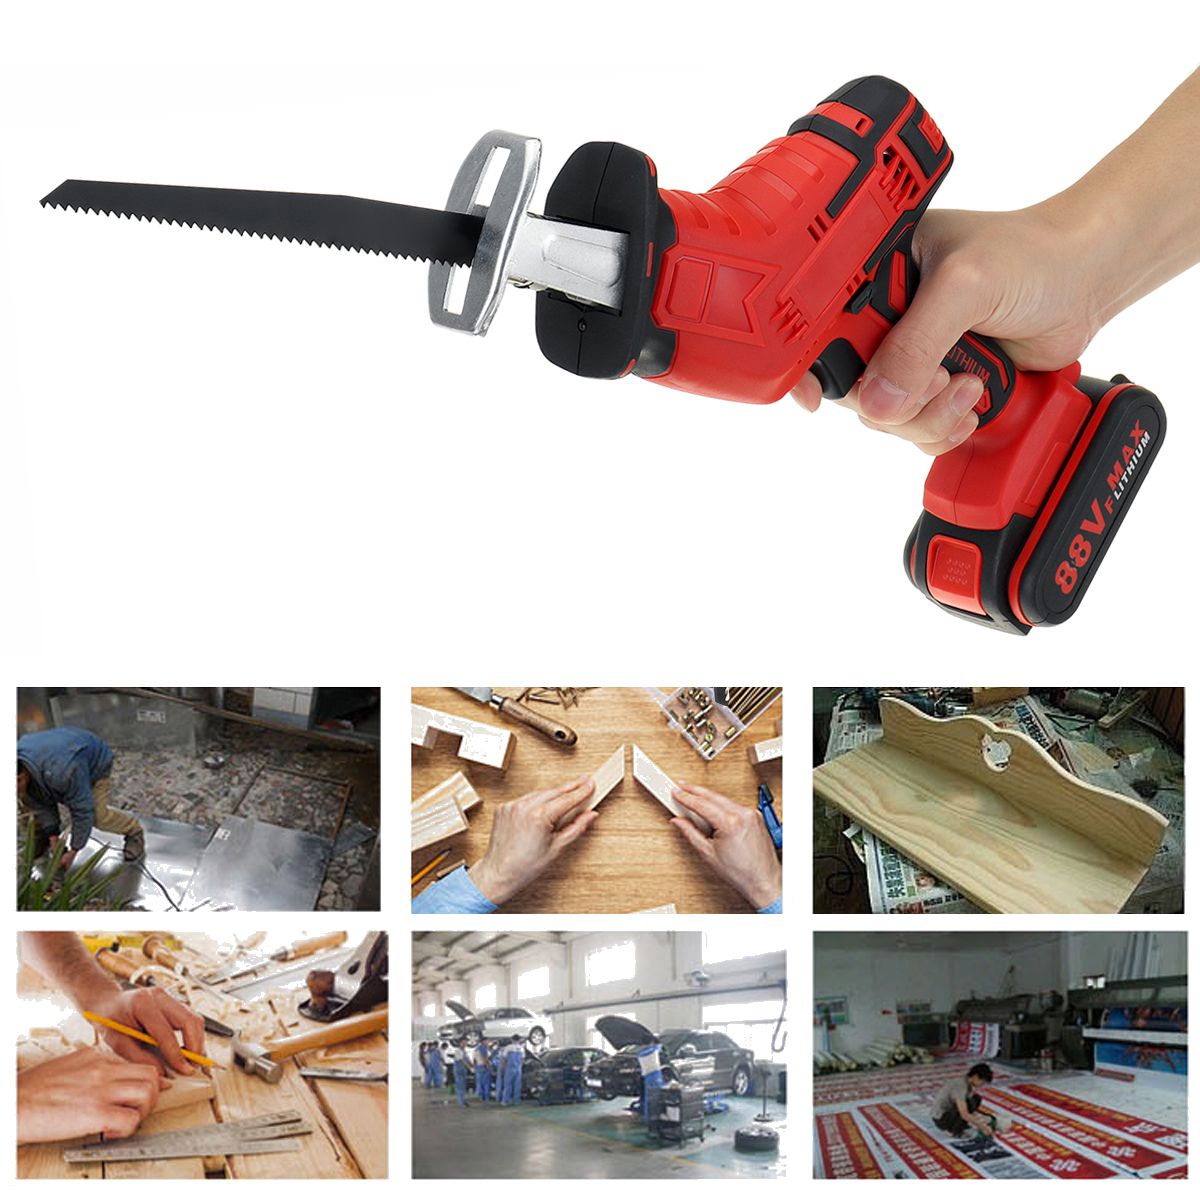 88VF-Electric-Reciprocating-Saws-Outdoor-Woodworking-Cordless-Portable-Wood-Cutting-Saw-1718639